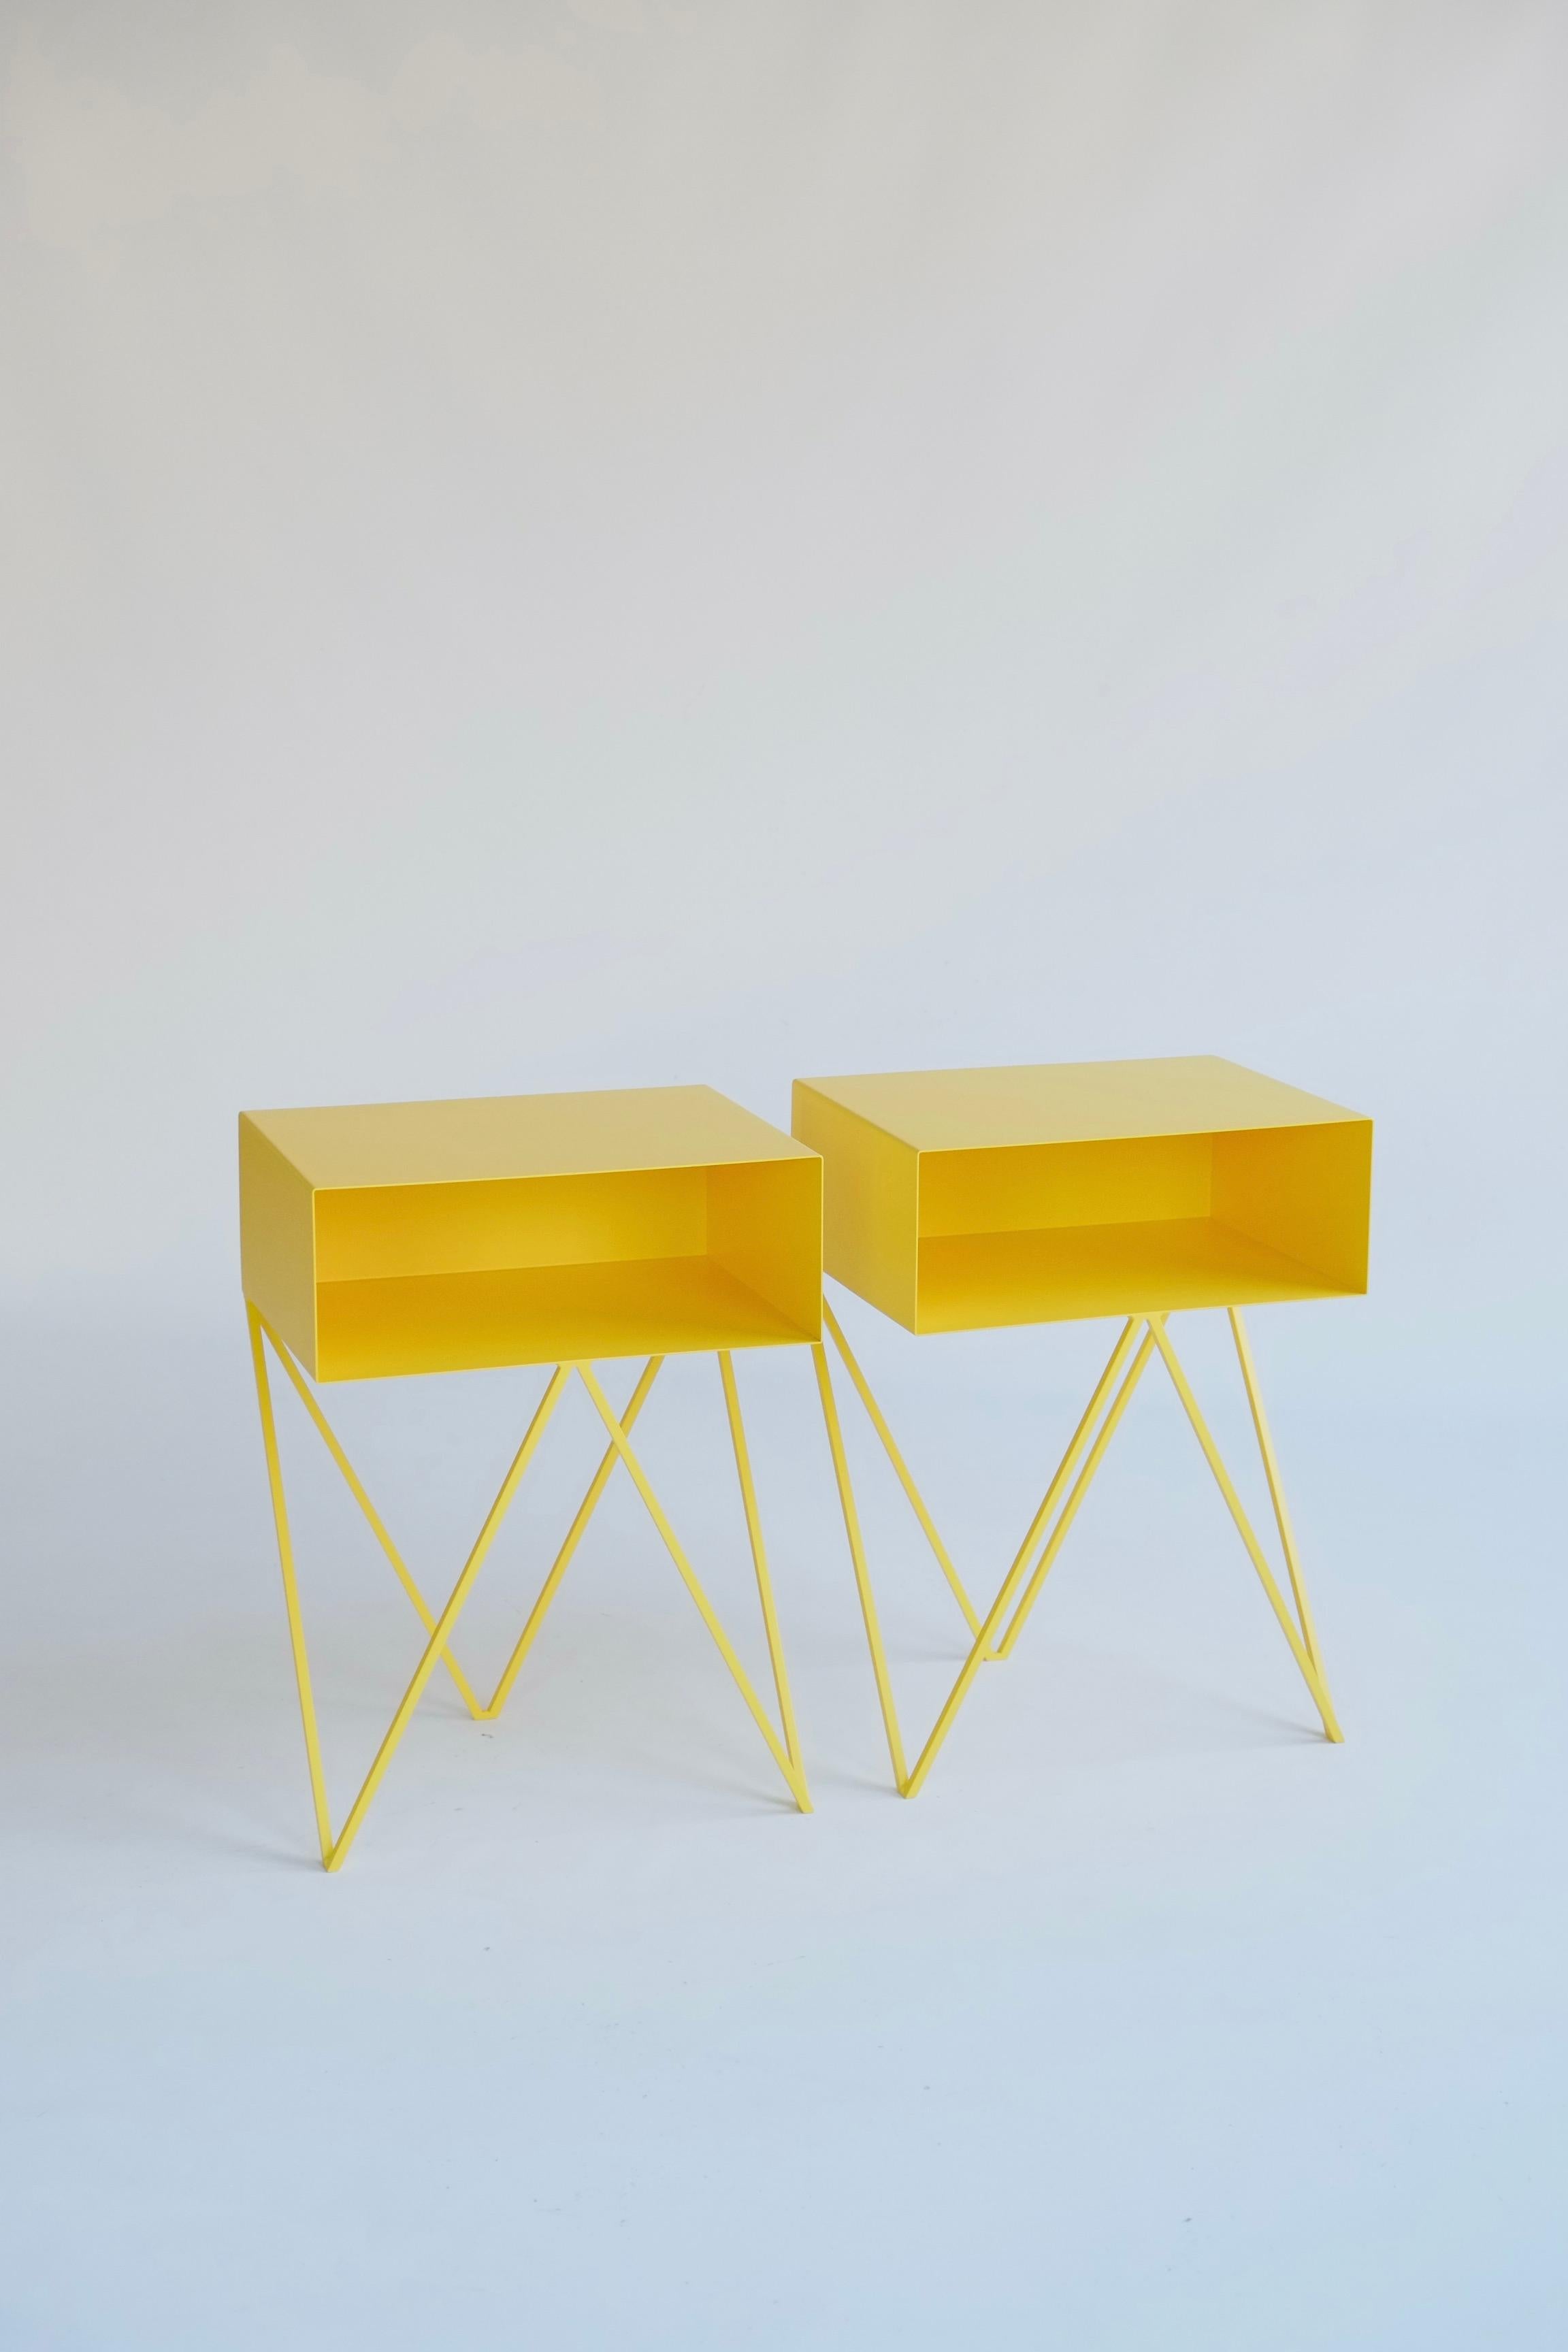 A beautiful pair of yellow Robot bedside tables. The Robot side table features an open shelf on zig zag legs. A fun and functional design made of solid steel, powder-coated in yellow. The clean lines look great against period details as well as in